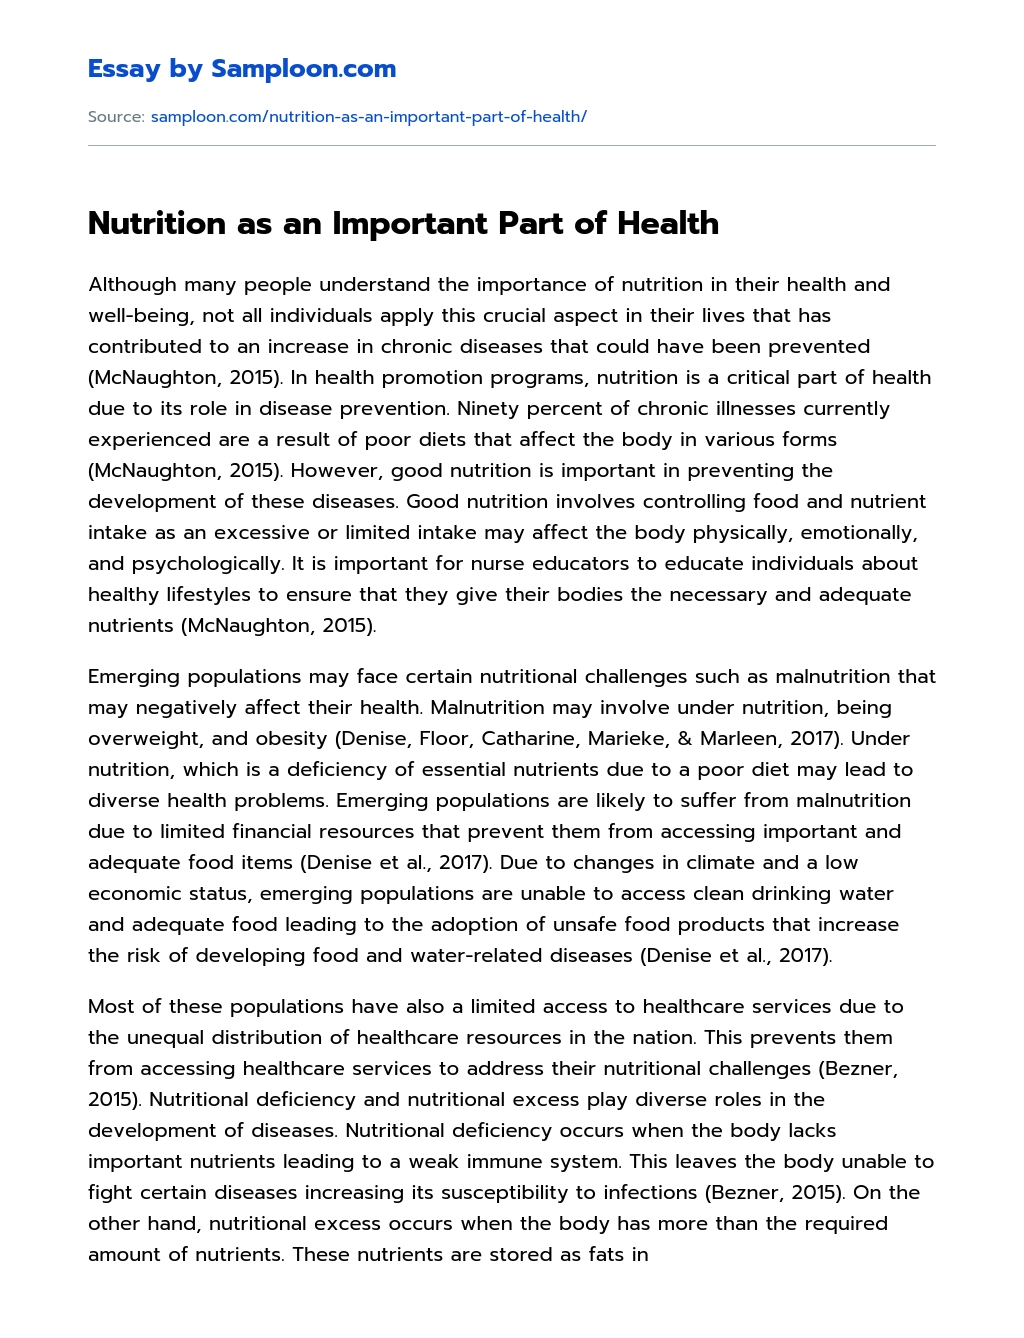 Nutrition as an Important Part of Health essay